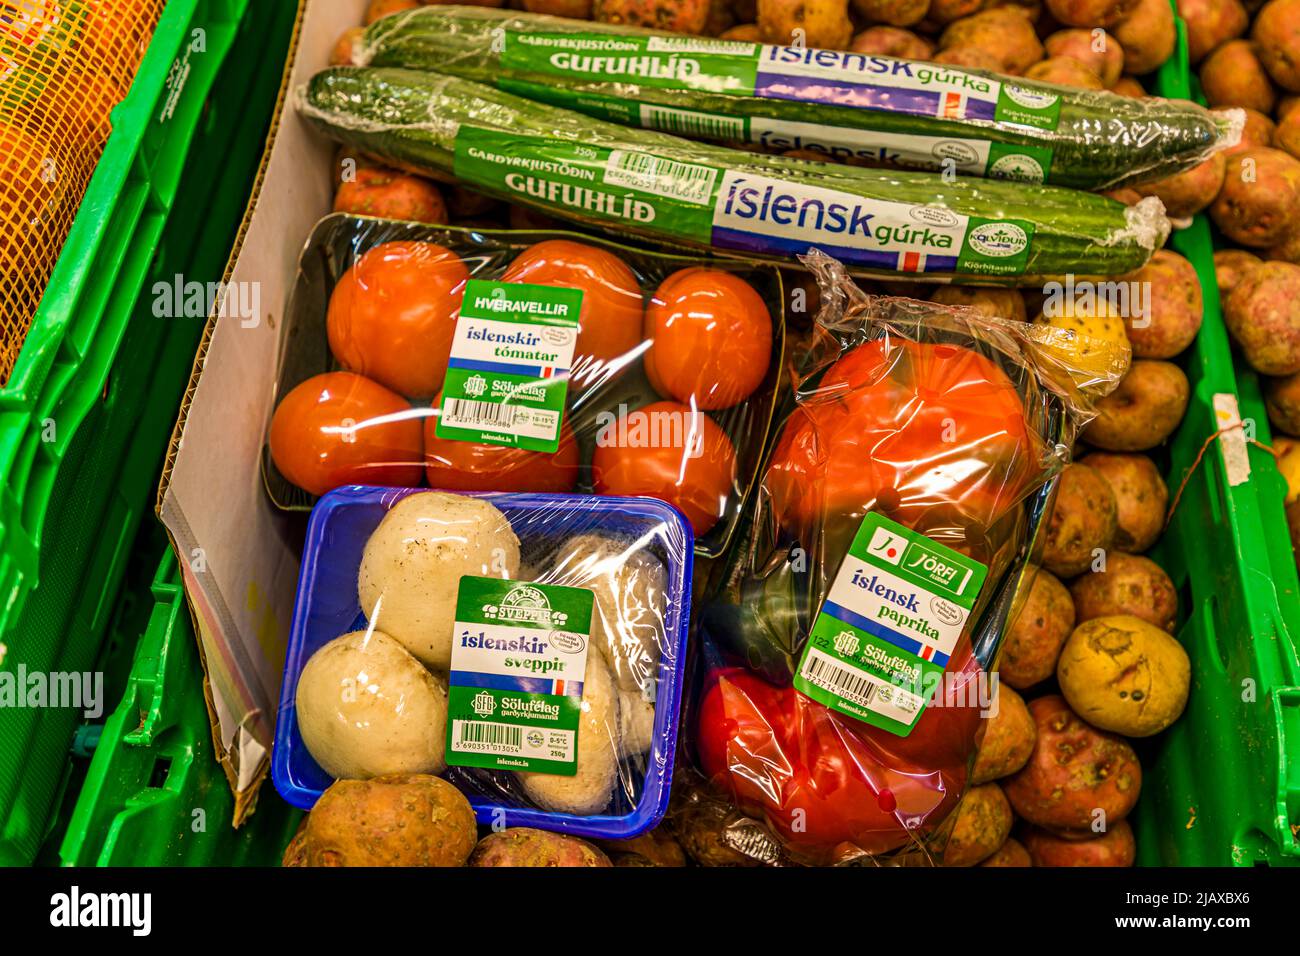 Vegetables from Icelandic greenhouses heated with geothermal energy in a supermarket of Reykjavik, Iceland Stock Photo